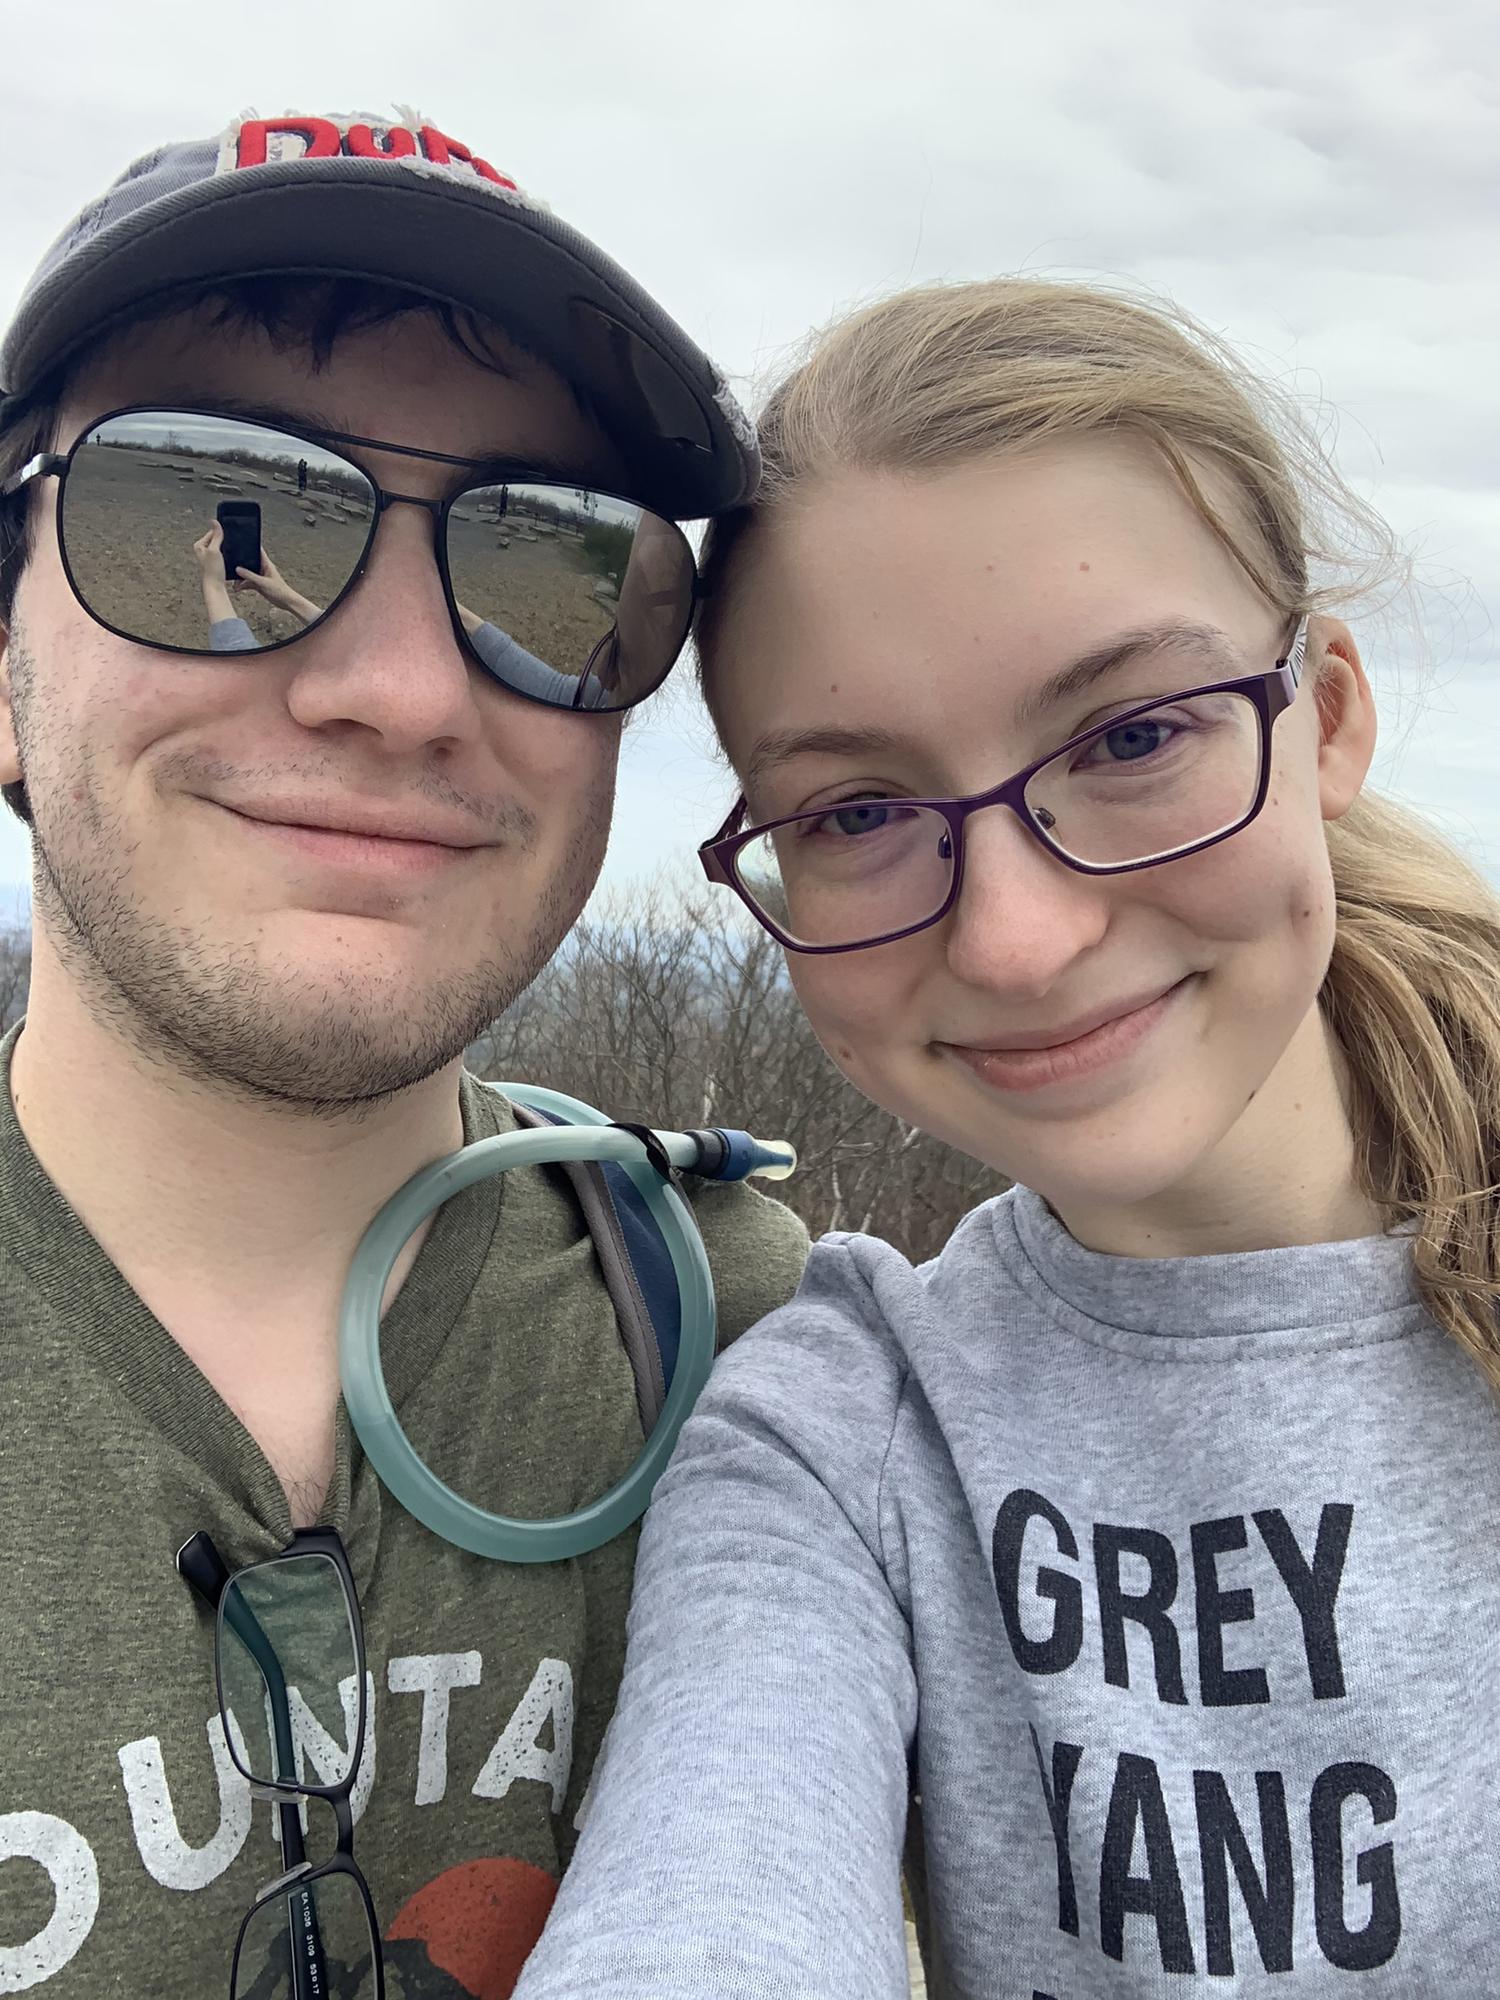 May 18th, 2020: Starting a new hiking hobby in the midst of newly pandemic-ridden America. Mount Wachusett was good to us.